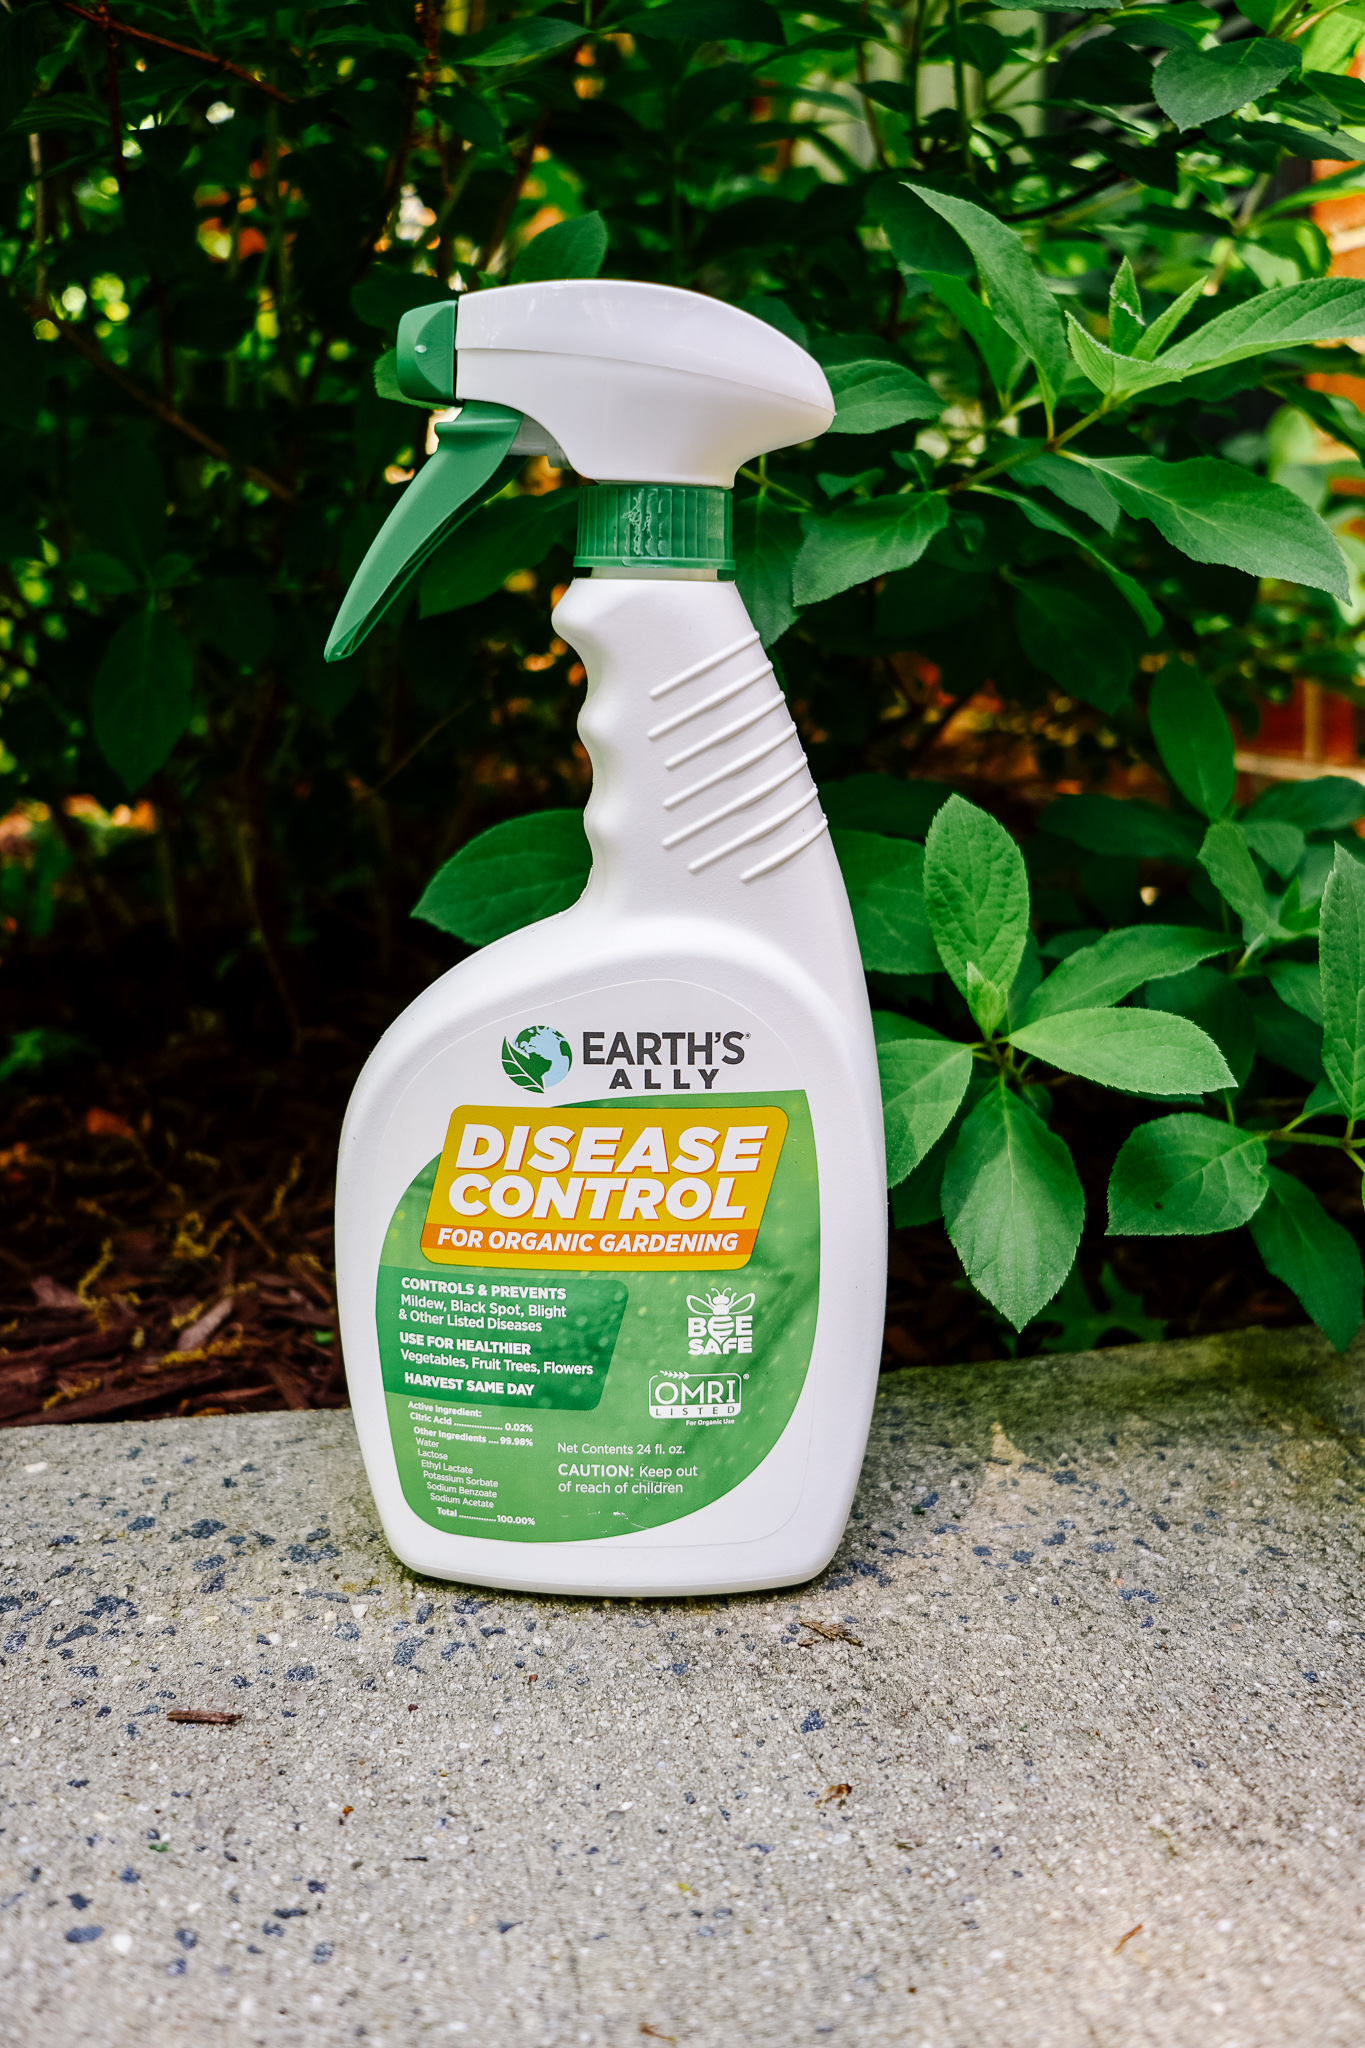 Earth's Ally Disease Control: A non-toxic product for indoor and outdoor plants